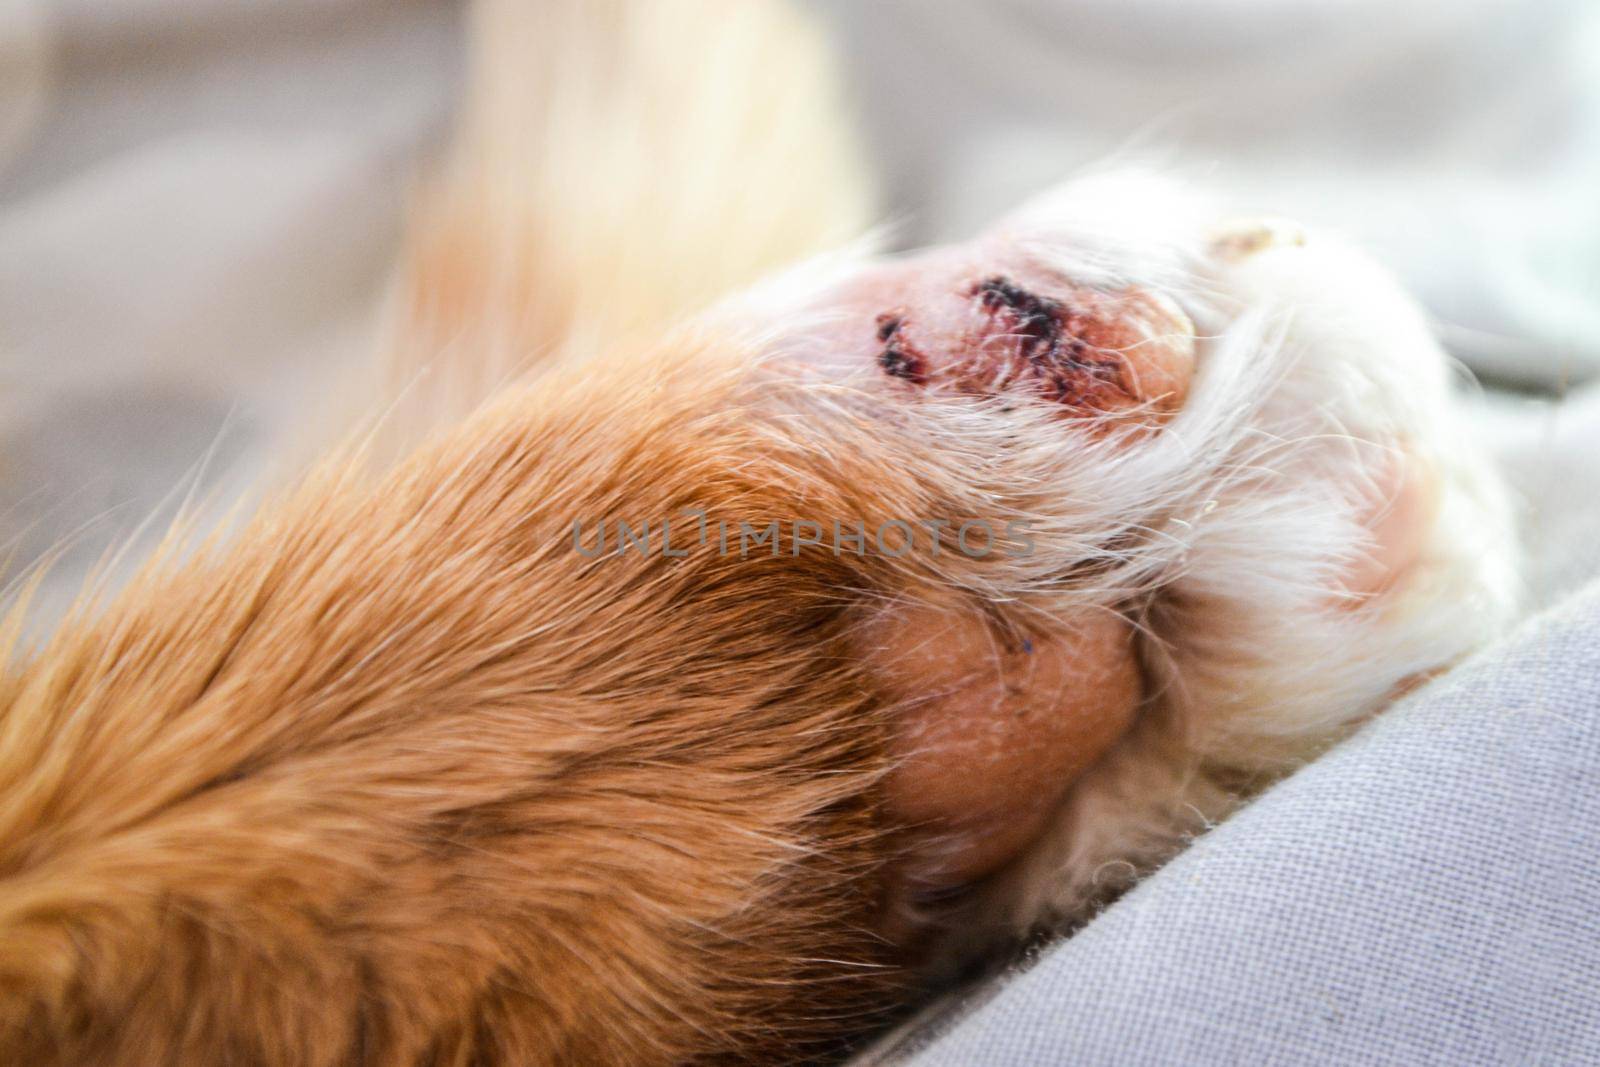 Paw of a sick bright orange cat. Cat's feet are wounds. High quality photo